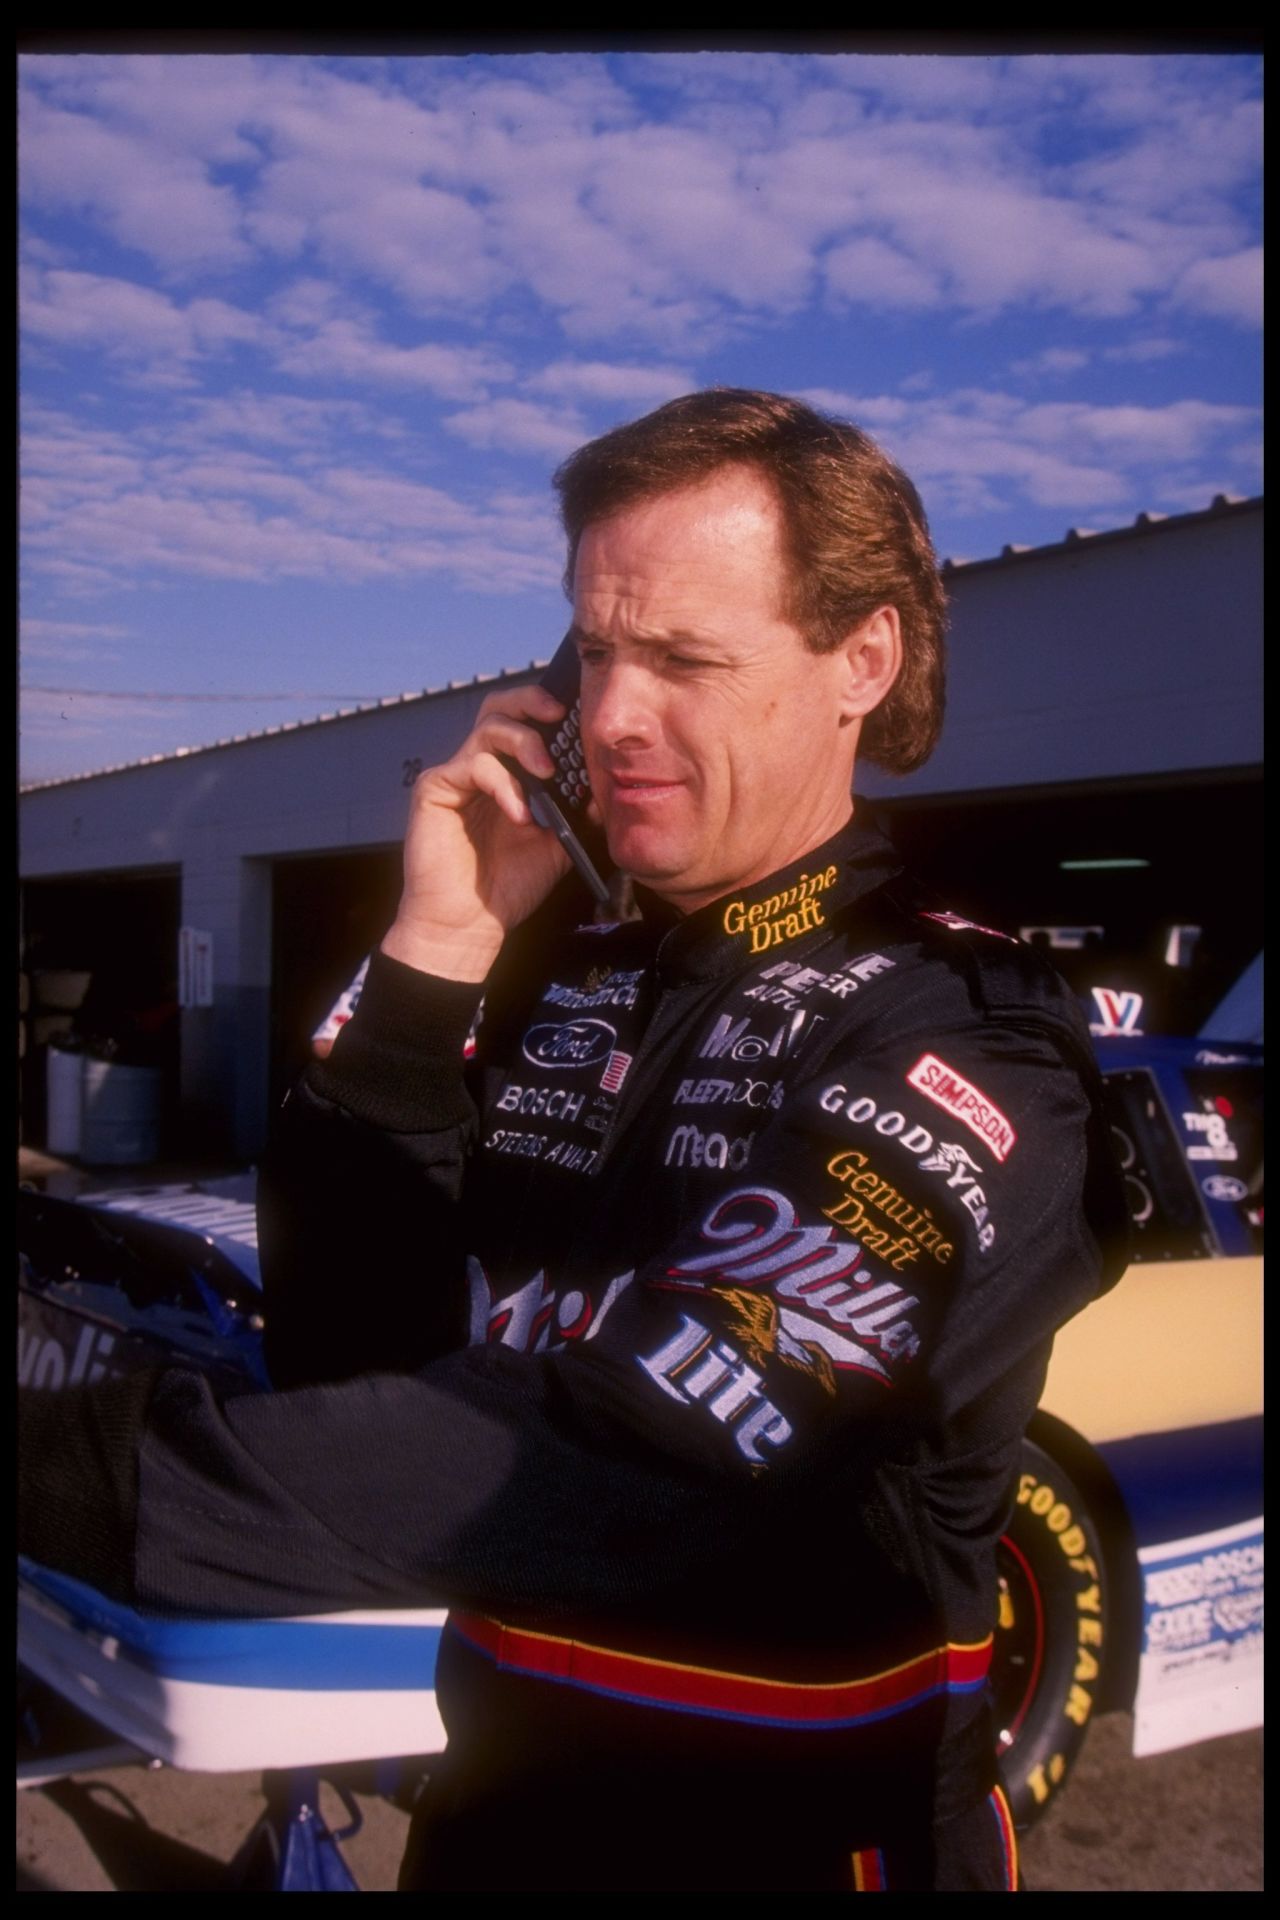 NASCAR driver Rusty Wallace talks on a cellphone during practice for the Daytona 500 in February 1996. Perhaps he's complaining to his barber about his hair.